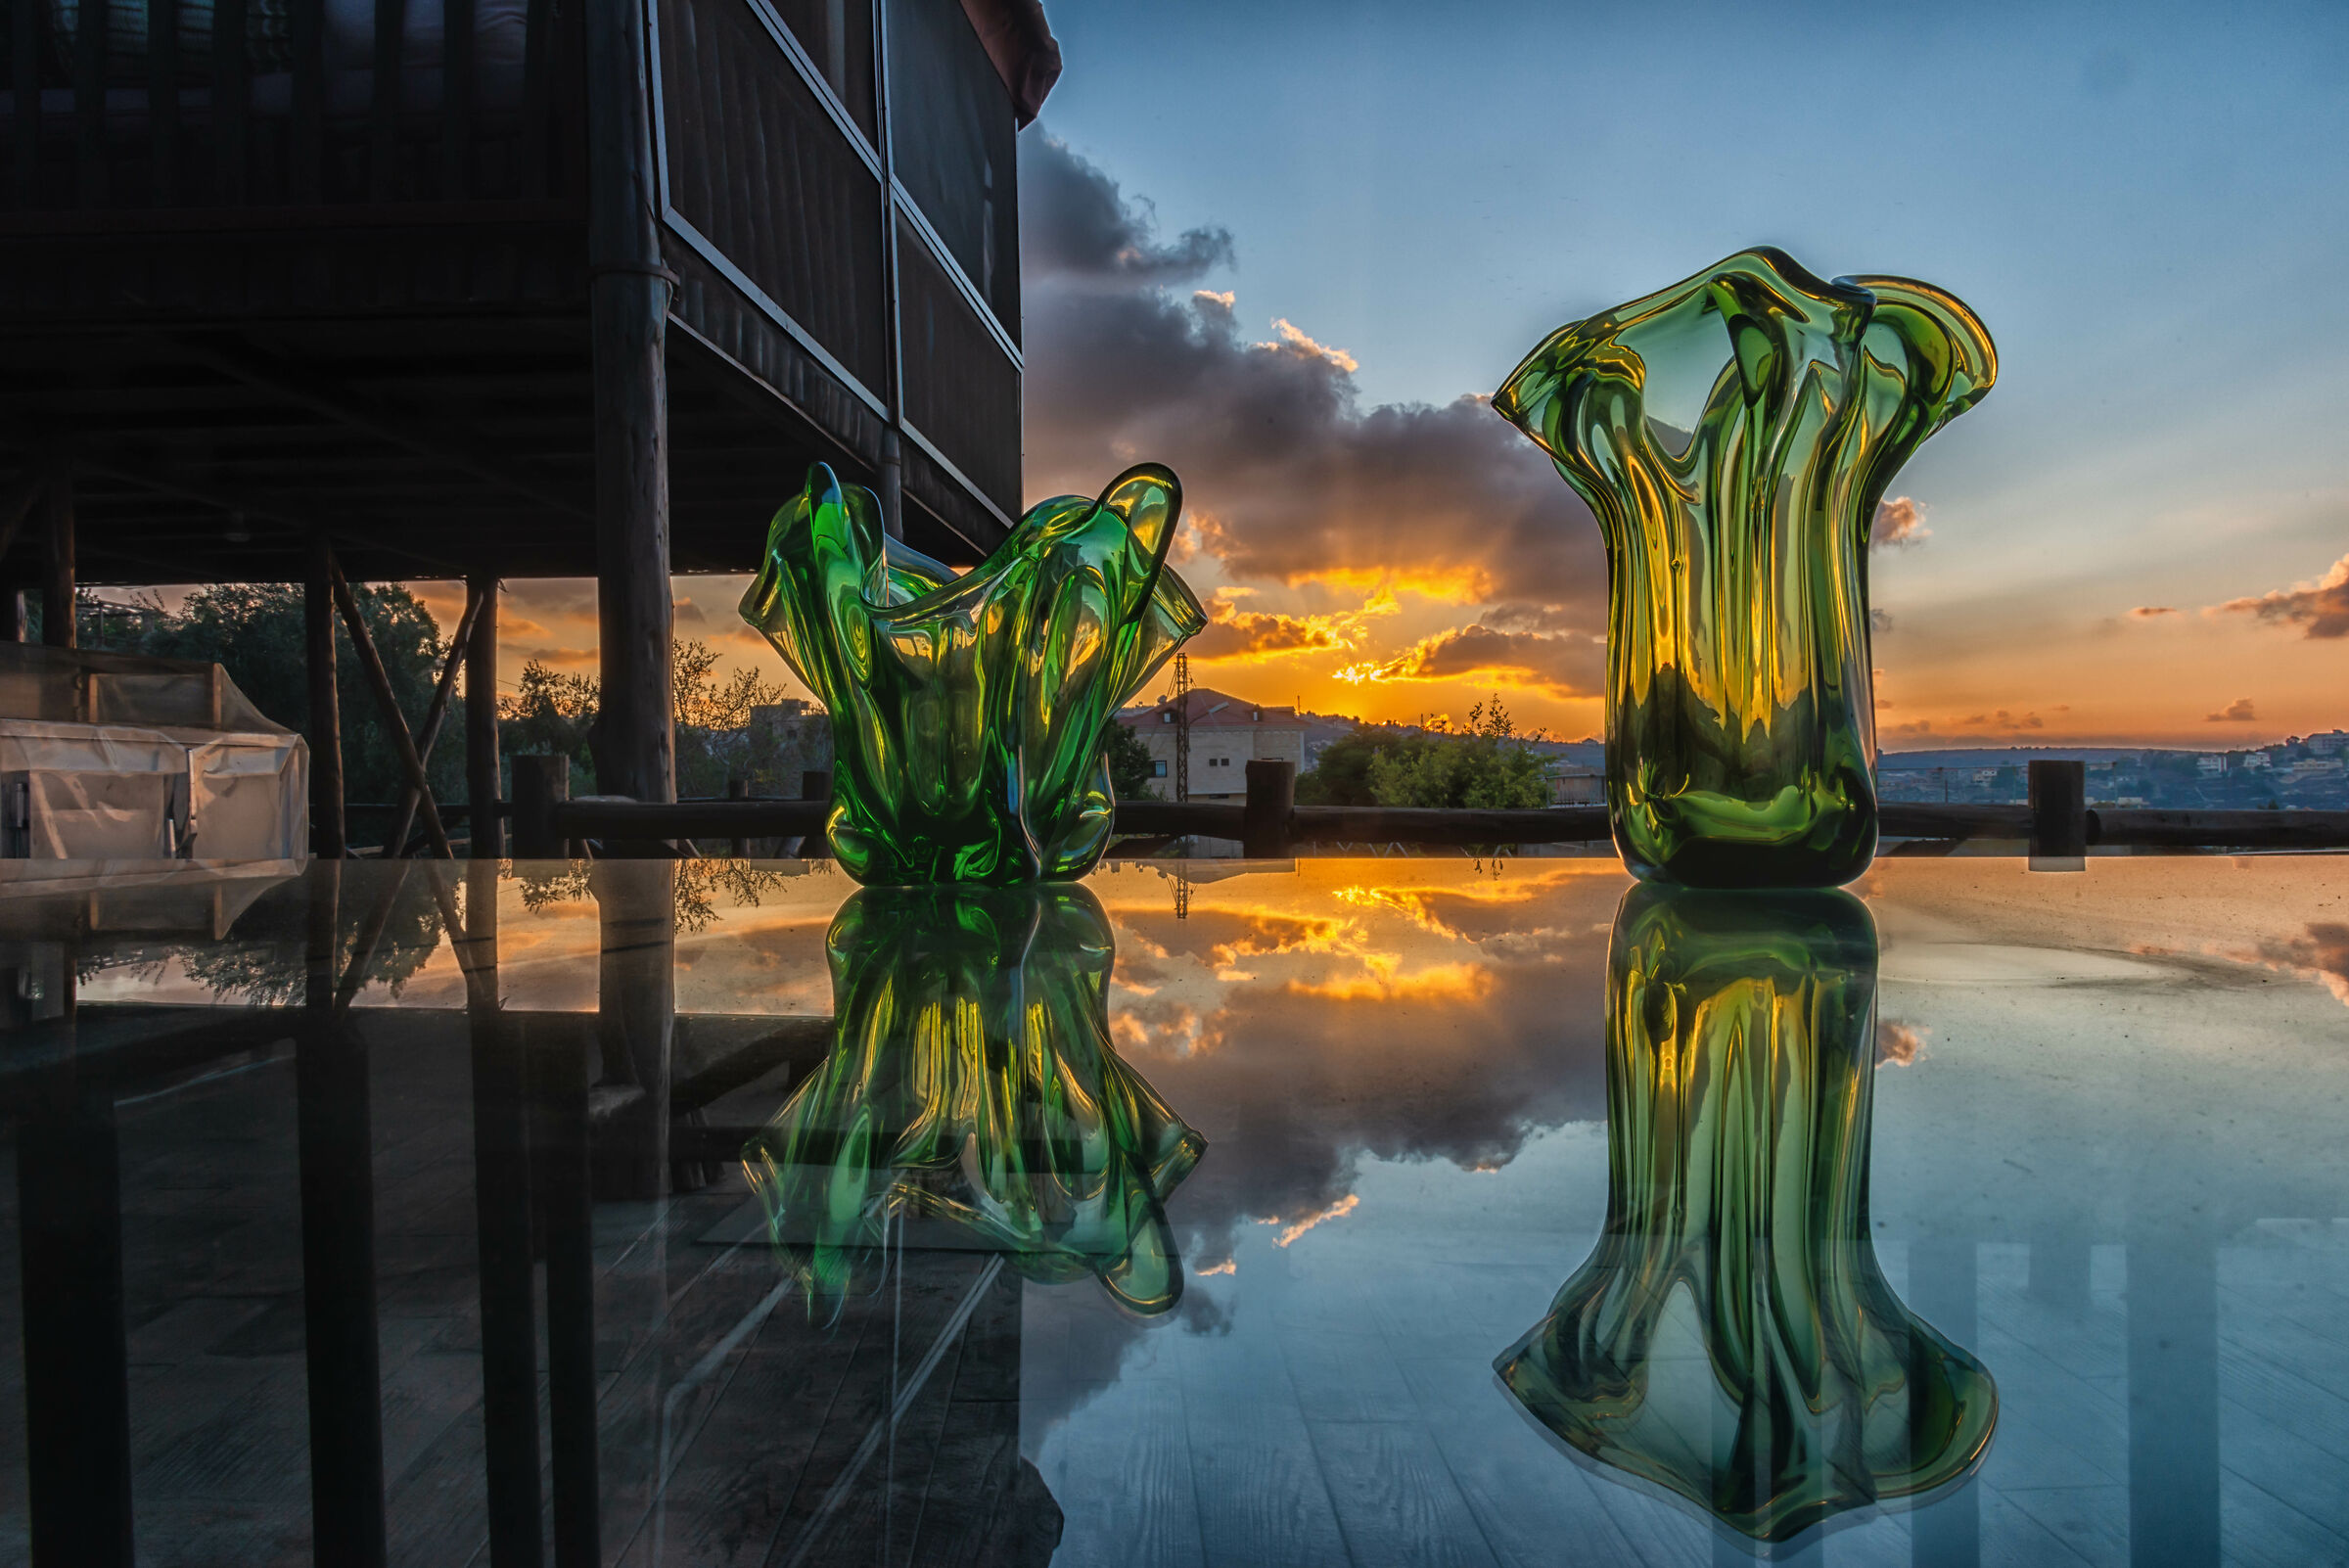 Vases, Sunset and Reflections...